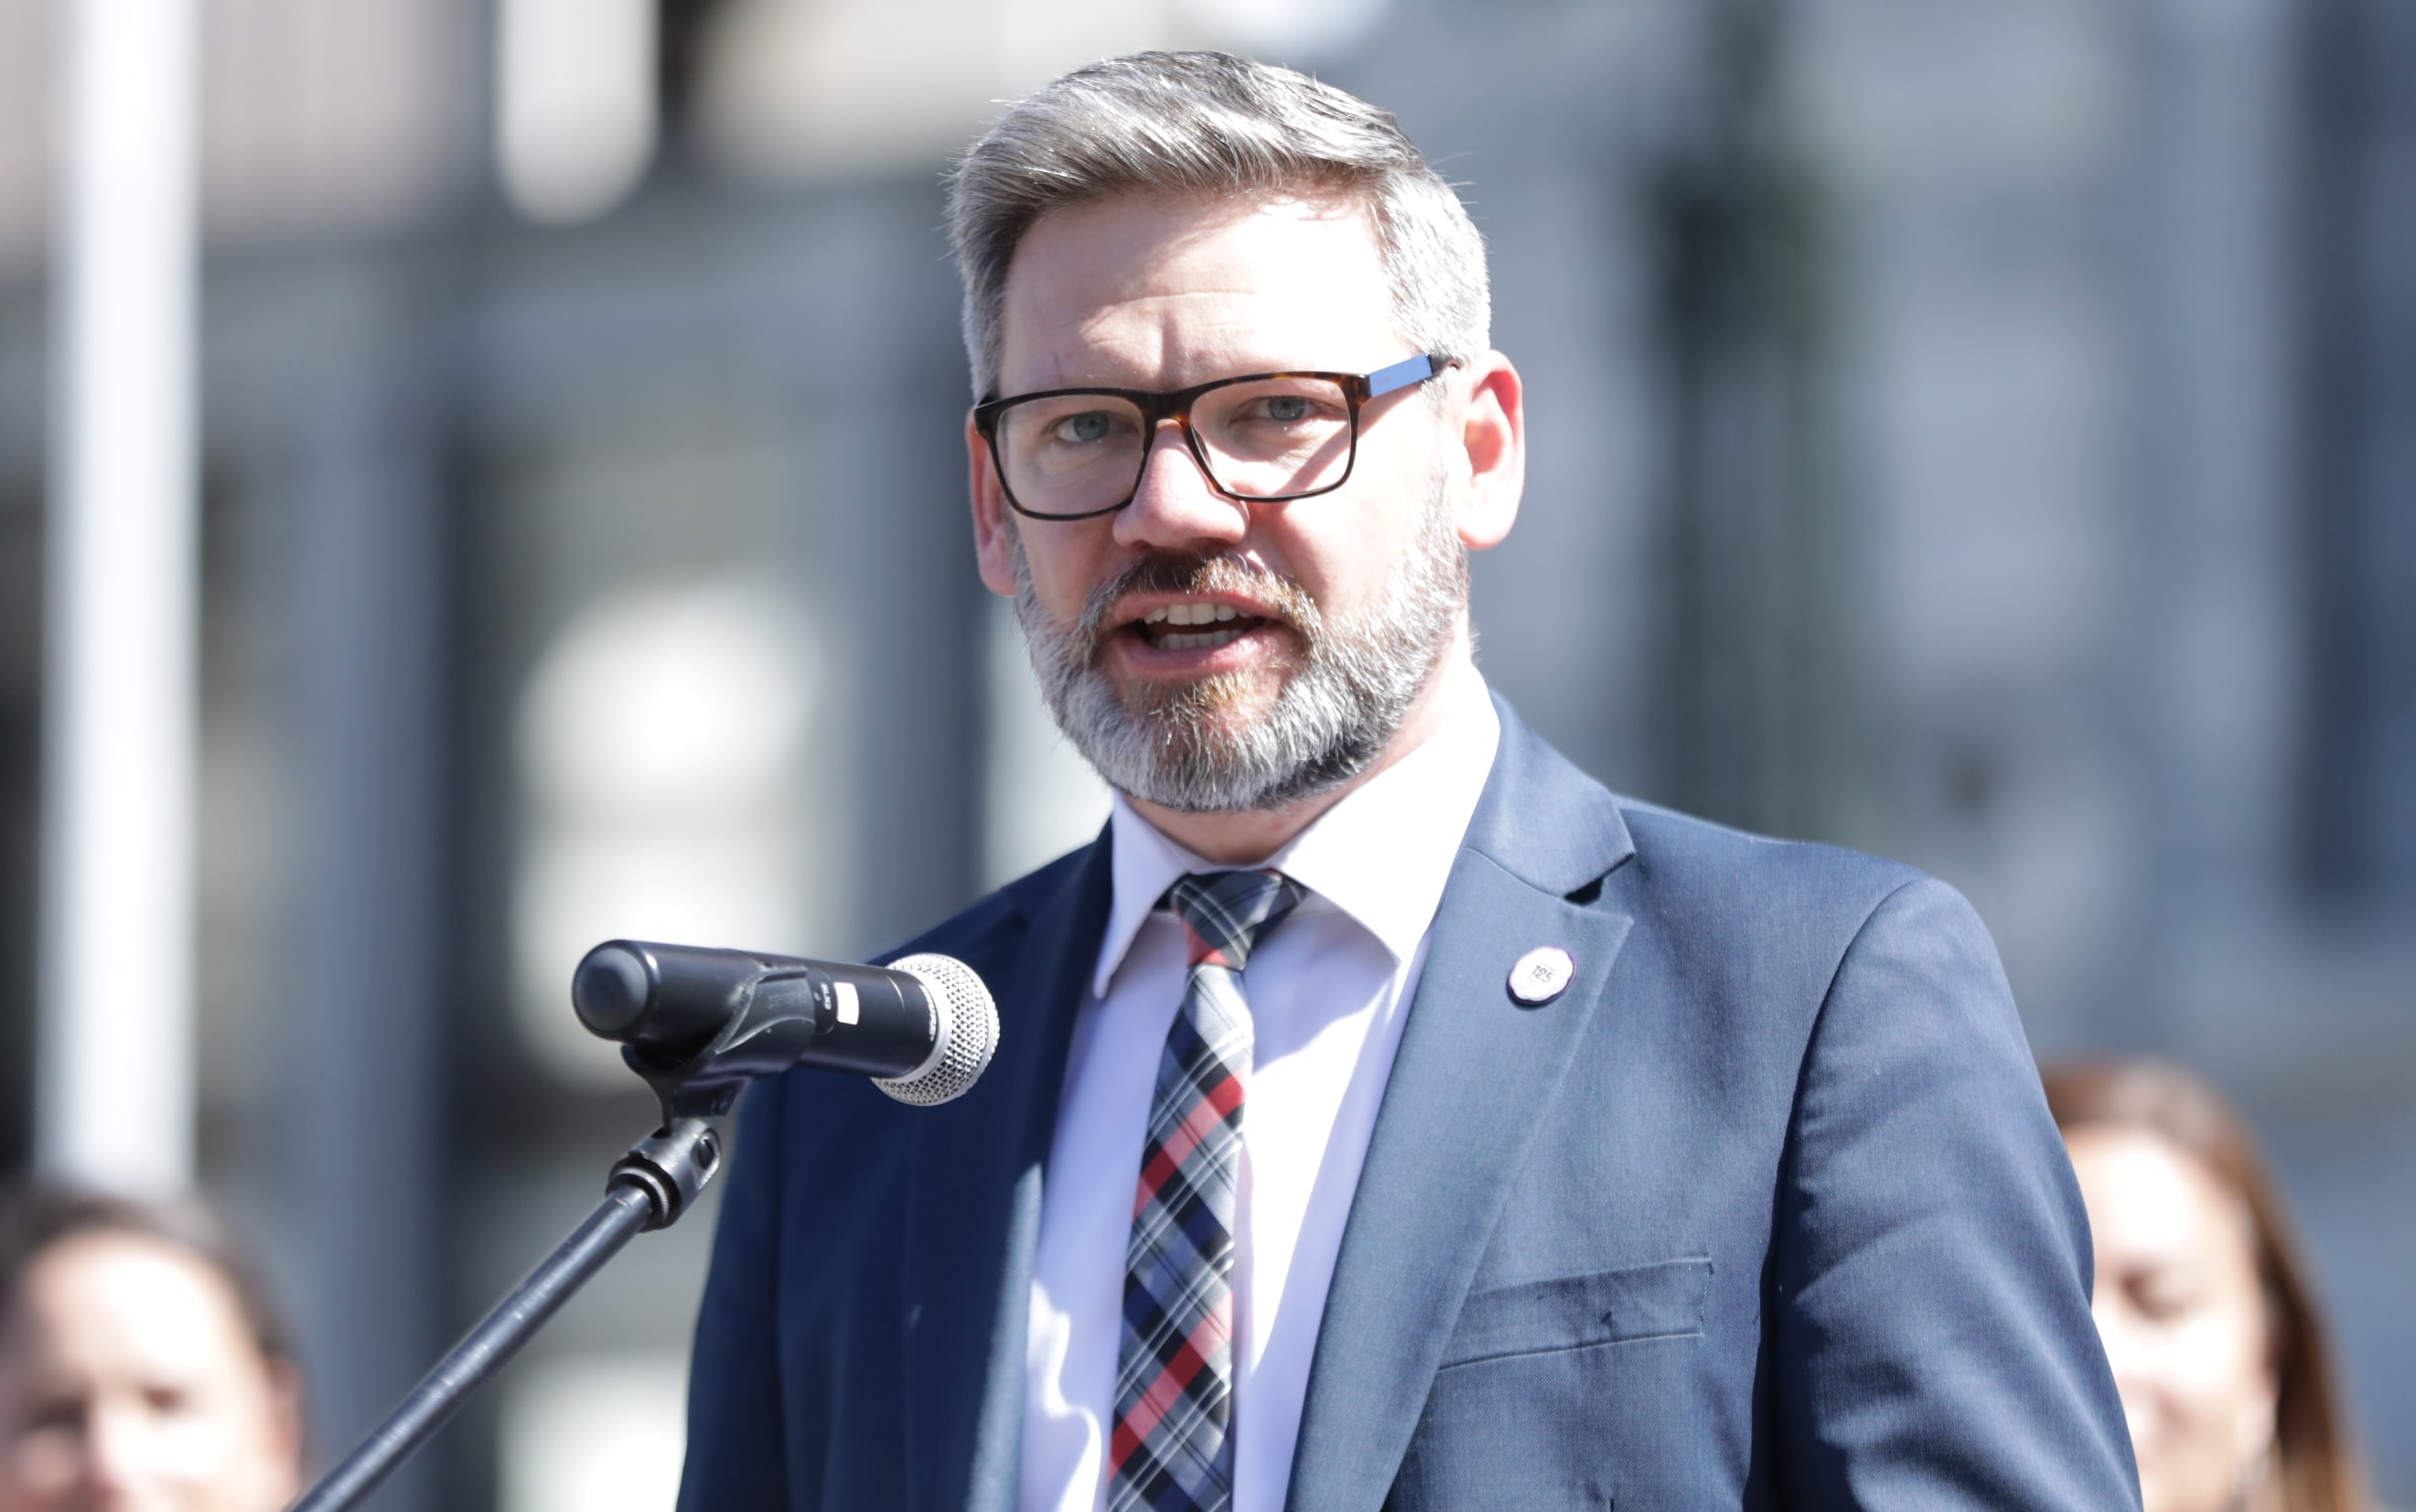 Workplace Relations Minister Iain Lees-Galloway said a bill being introduced by the government clarified what pay equity claim was and the process for dealing with it.